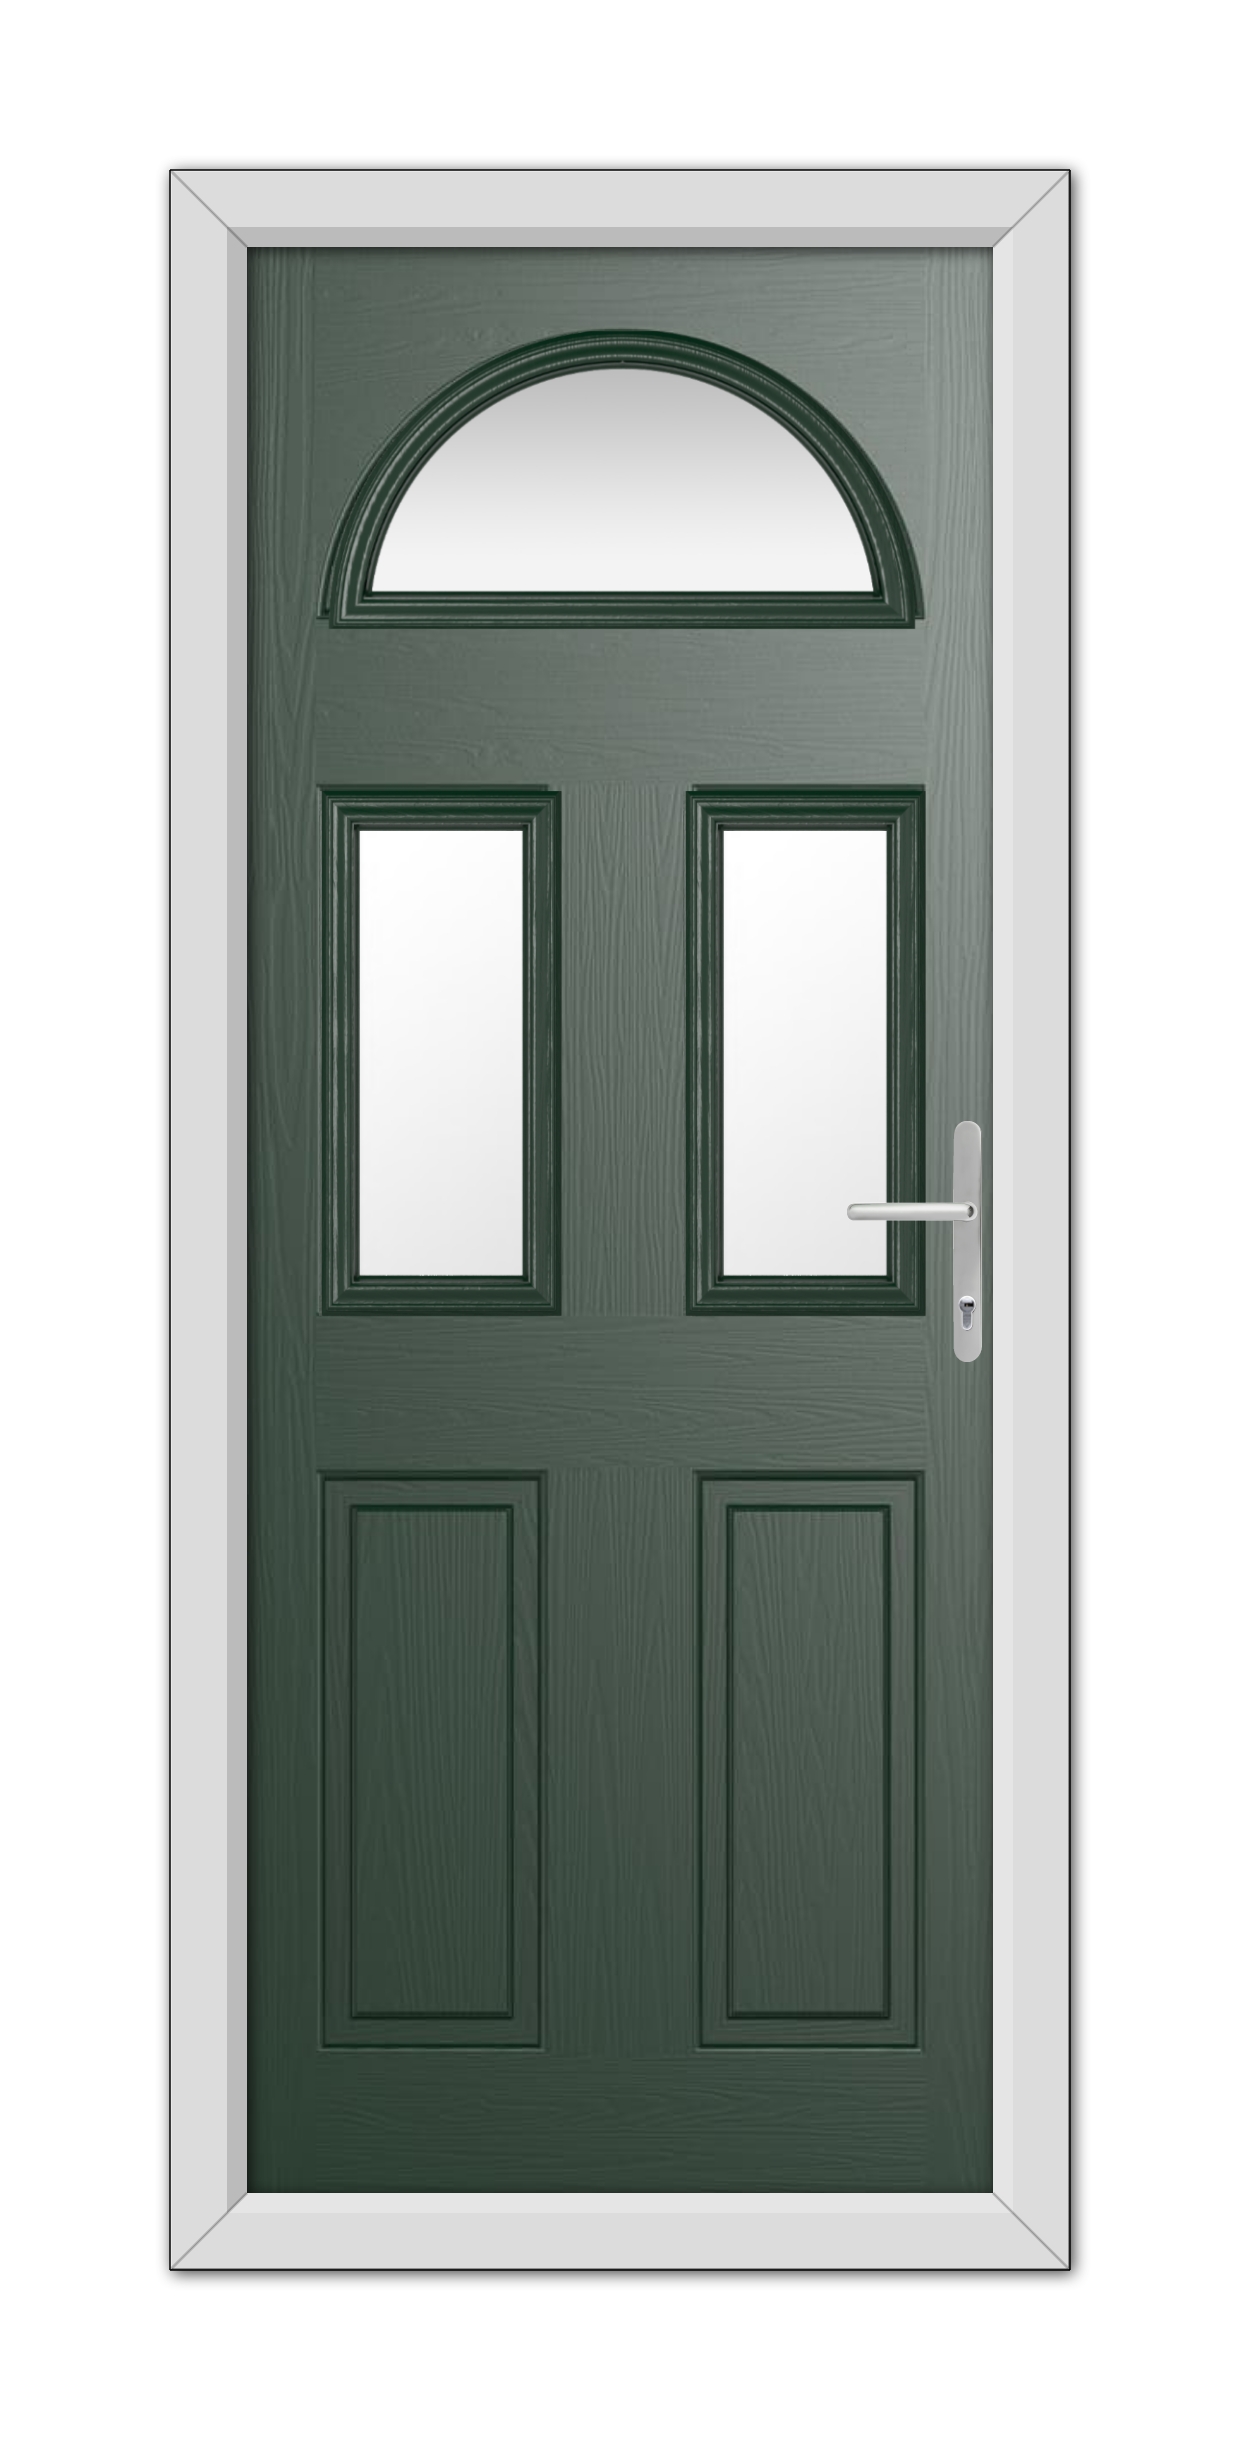 A Green Winslow 3 Composite Door with a semicircular transom window and white frame, featuring three rectangular glass panels.